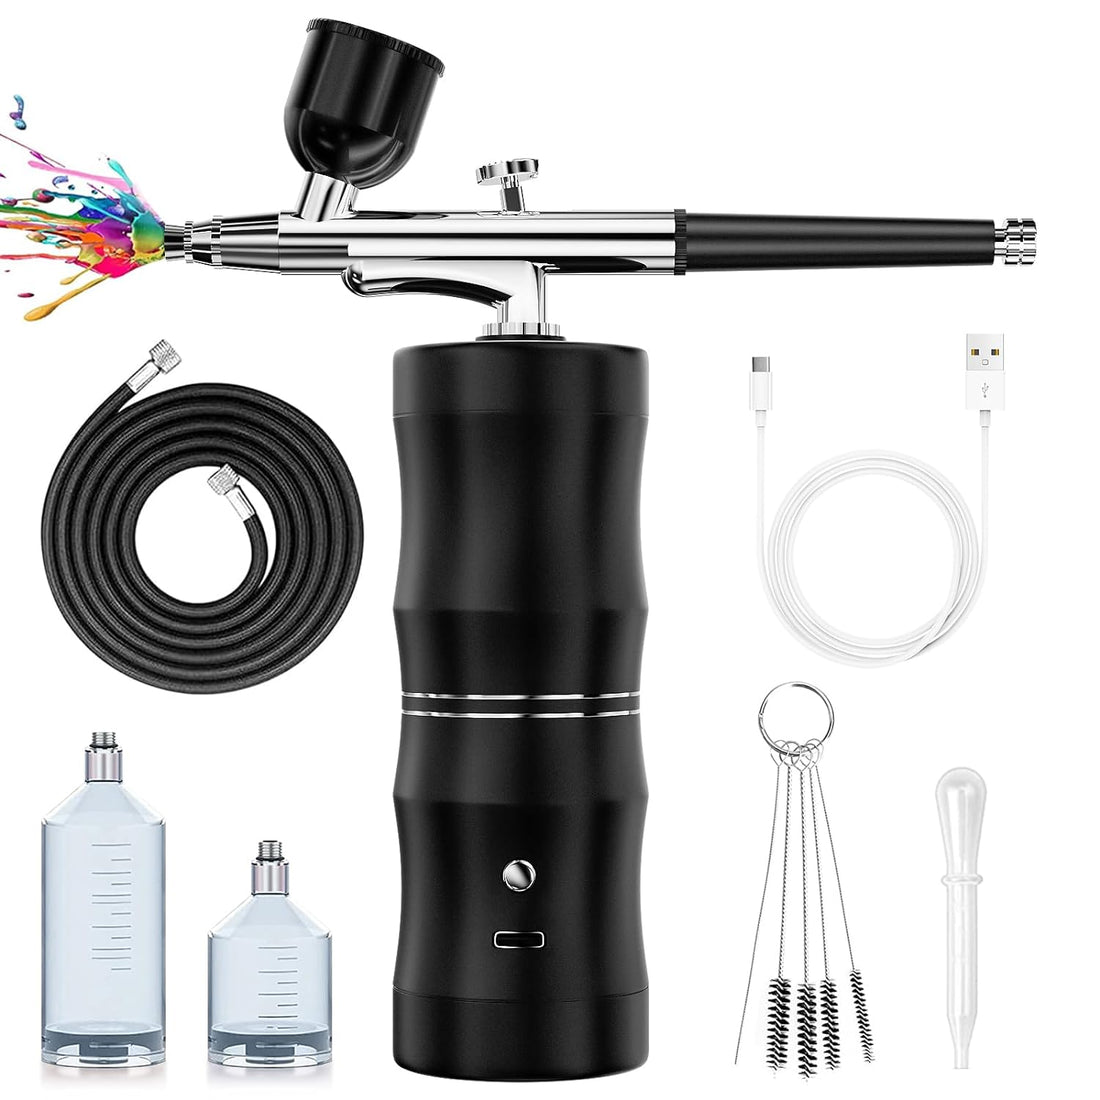 Rhinowisdom Airbrush Kit with Compressor, Air Brush Gun Rechargeable Portable High Pressure Air Brushes with 0.3mm Nozzle and Cleaning Brush Set for Nail,Painting,Tattoos,Makeup,Art,Cake Decorating